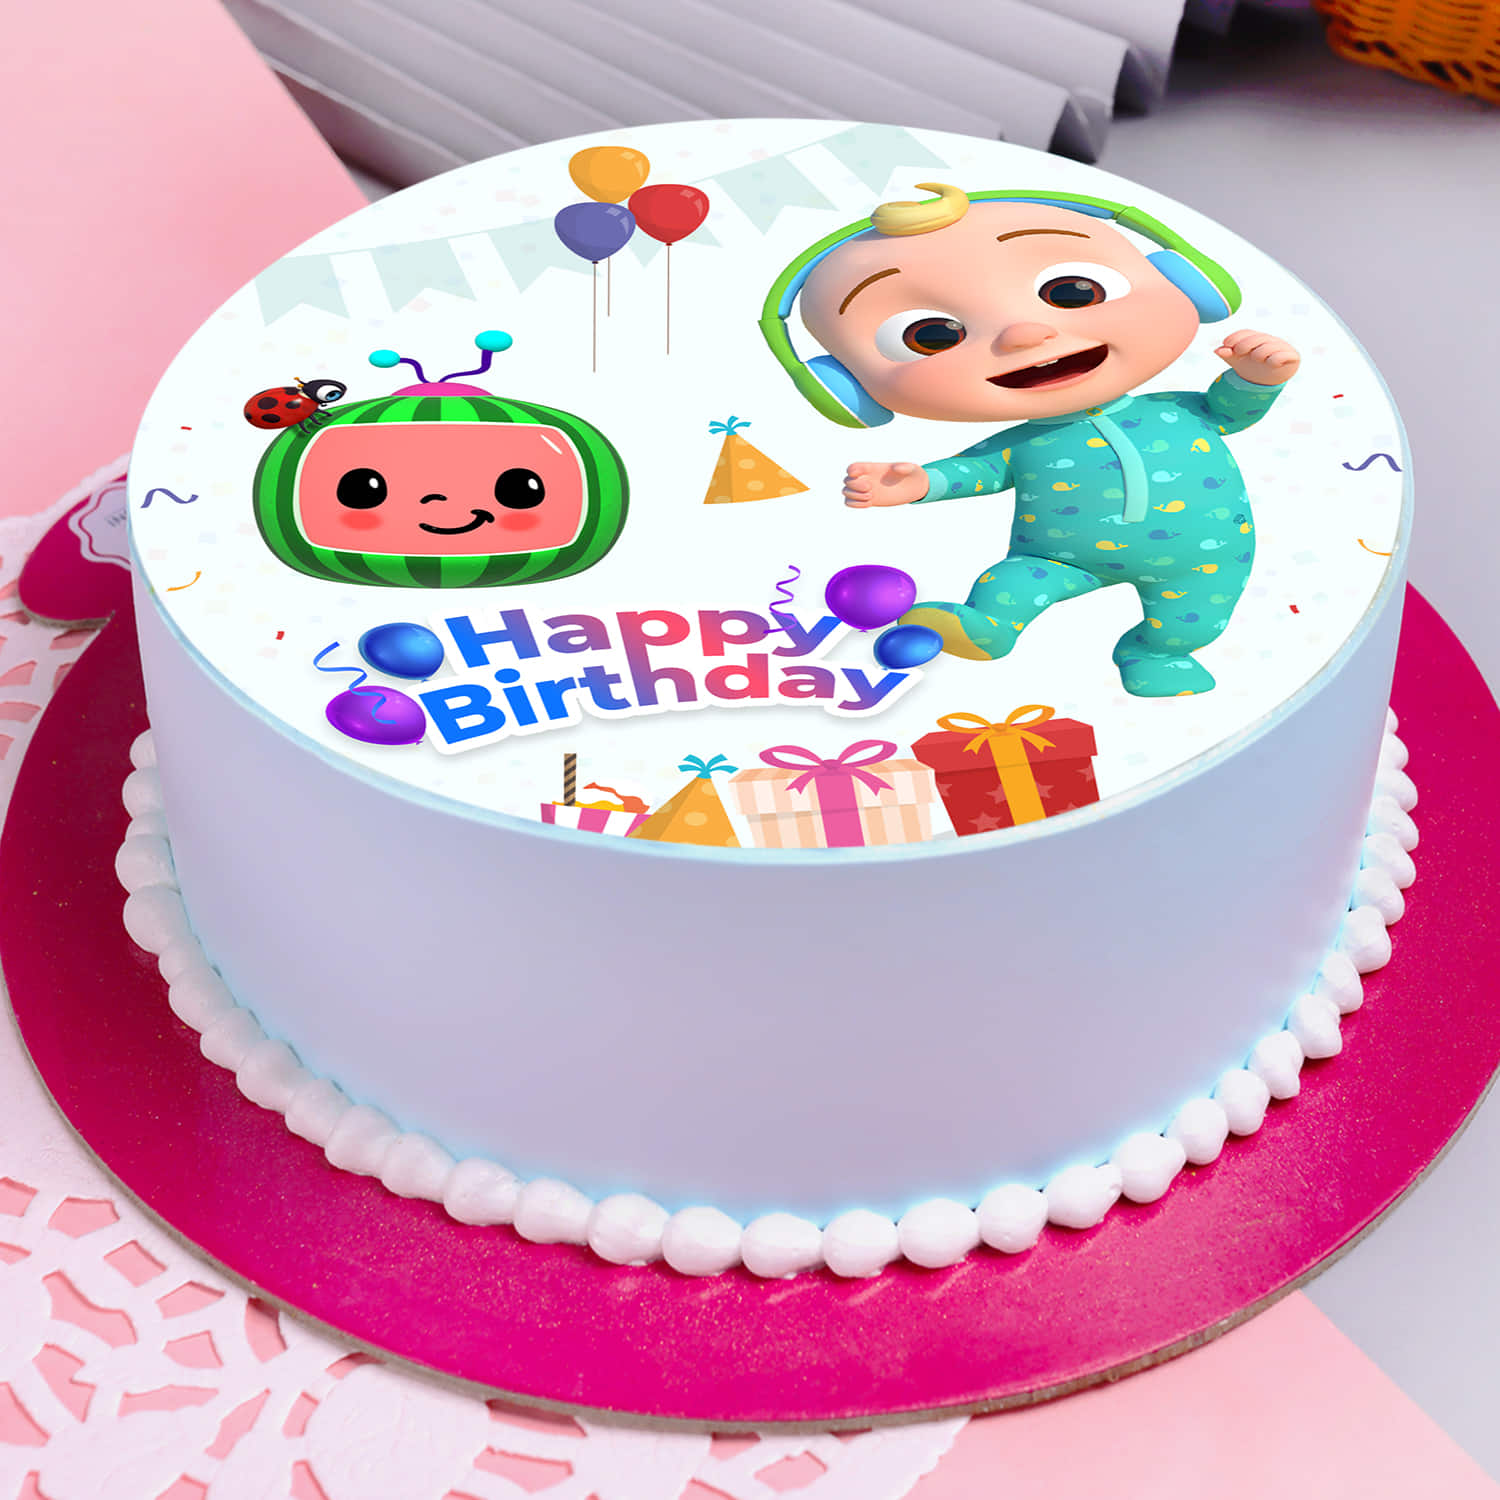 Baby boy's first birthday cake: Gift ideas and inspiration - CakeZone Blog